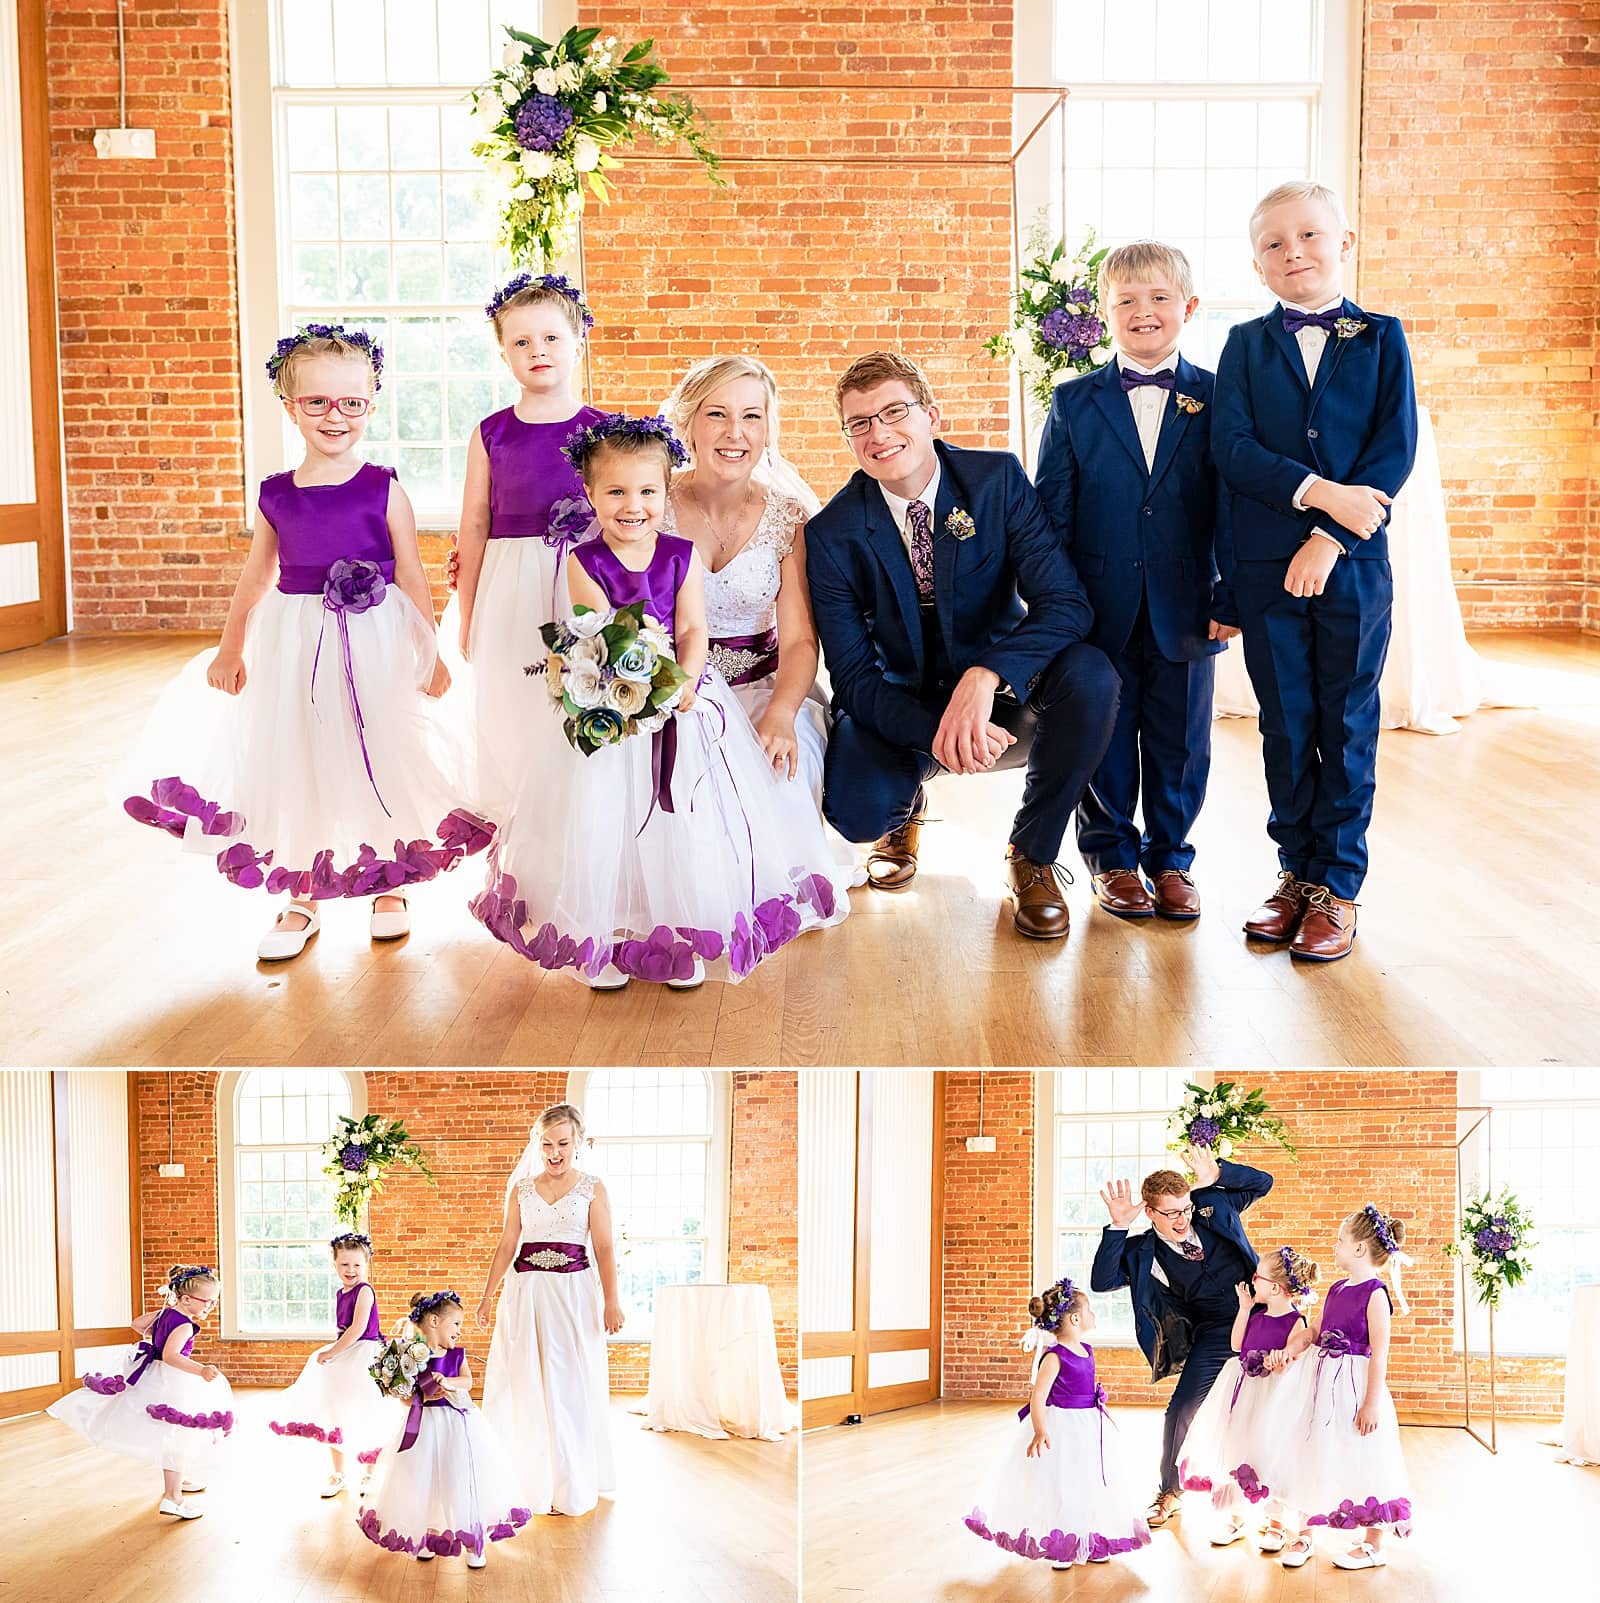 Adorable flower girls and ring bearers pose with the bride and groom